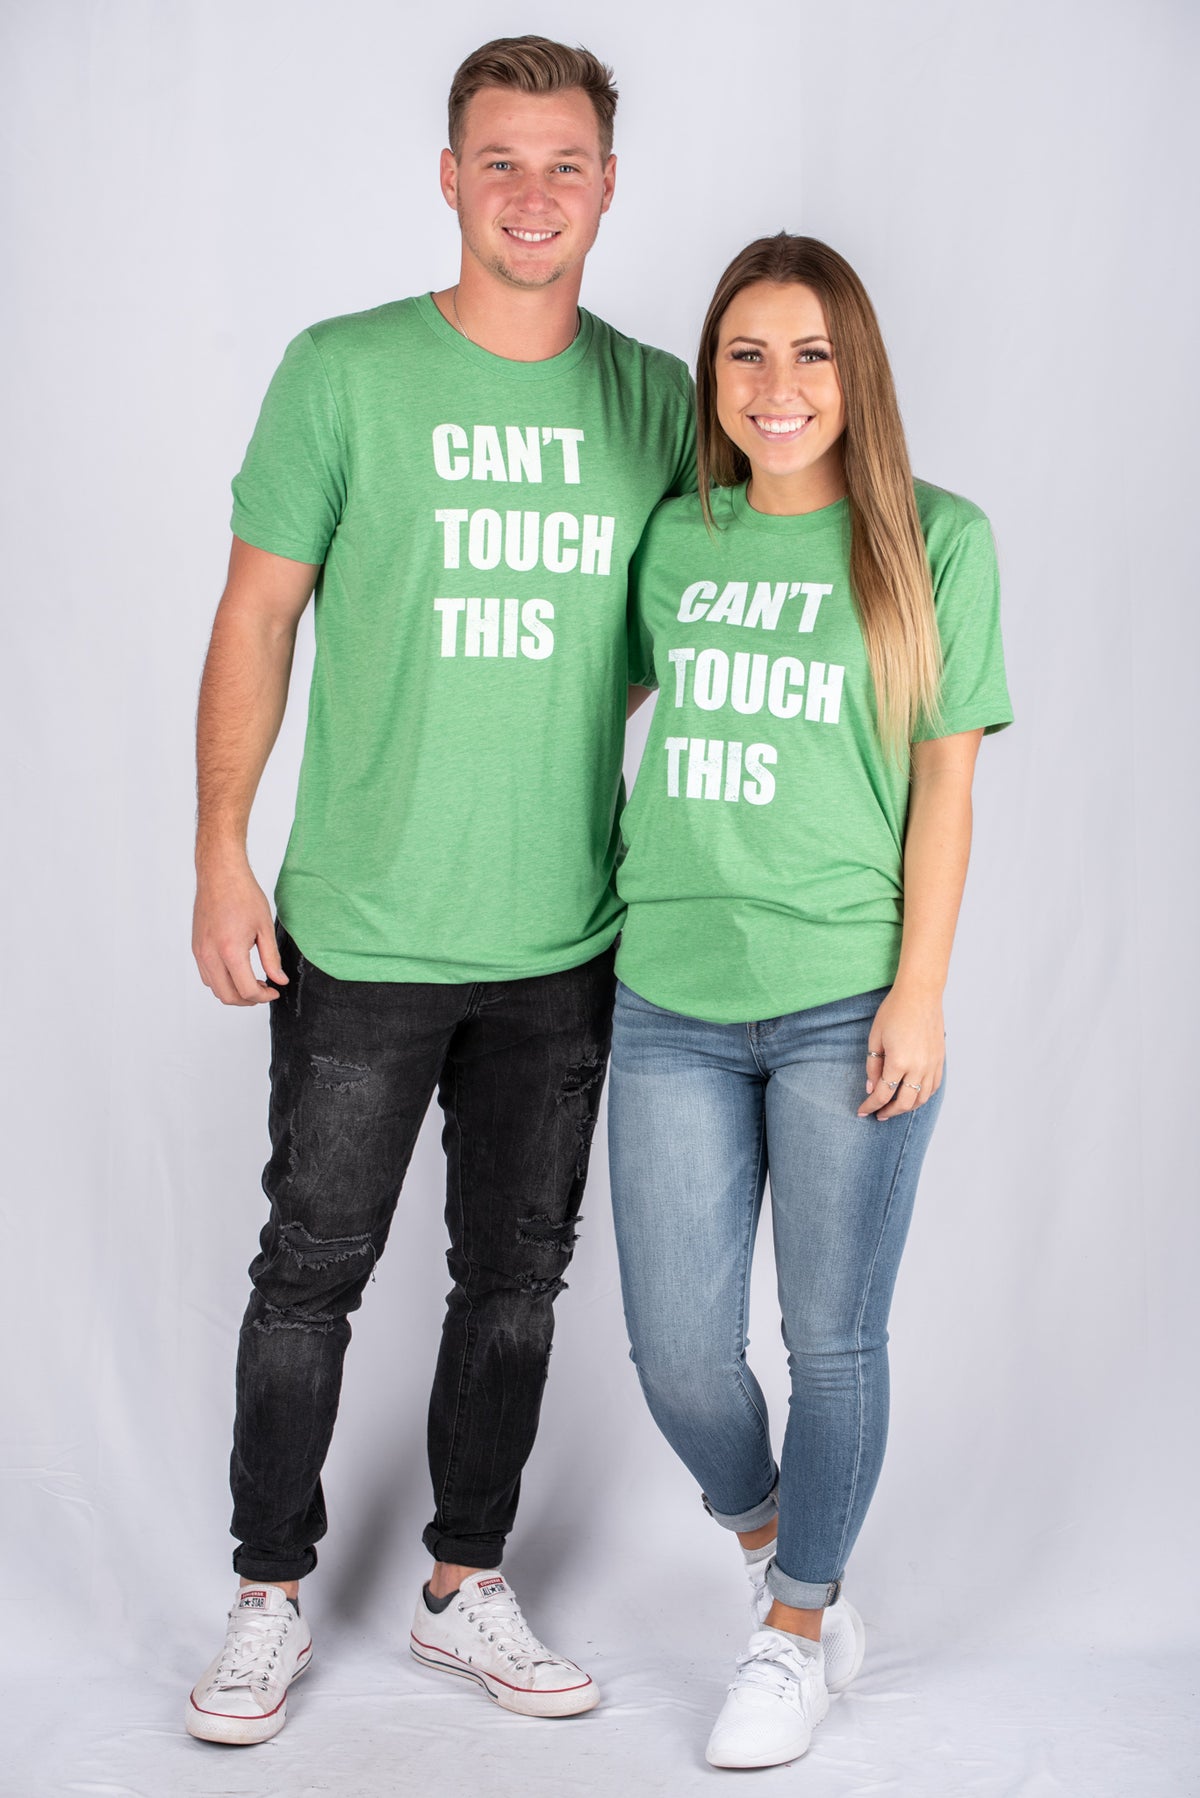 Can't Touch This Unisex Green T-shirt - Stylish T-shirts - Trendy Graphic T-Shirts and Tank Tops at Lush Fashion Lounge Boutique in Oklahoma City